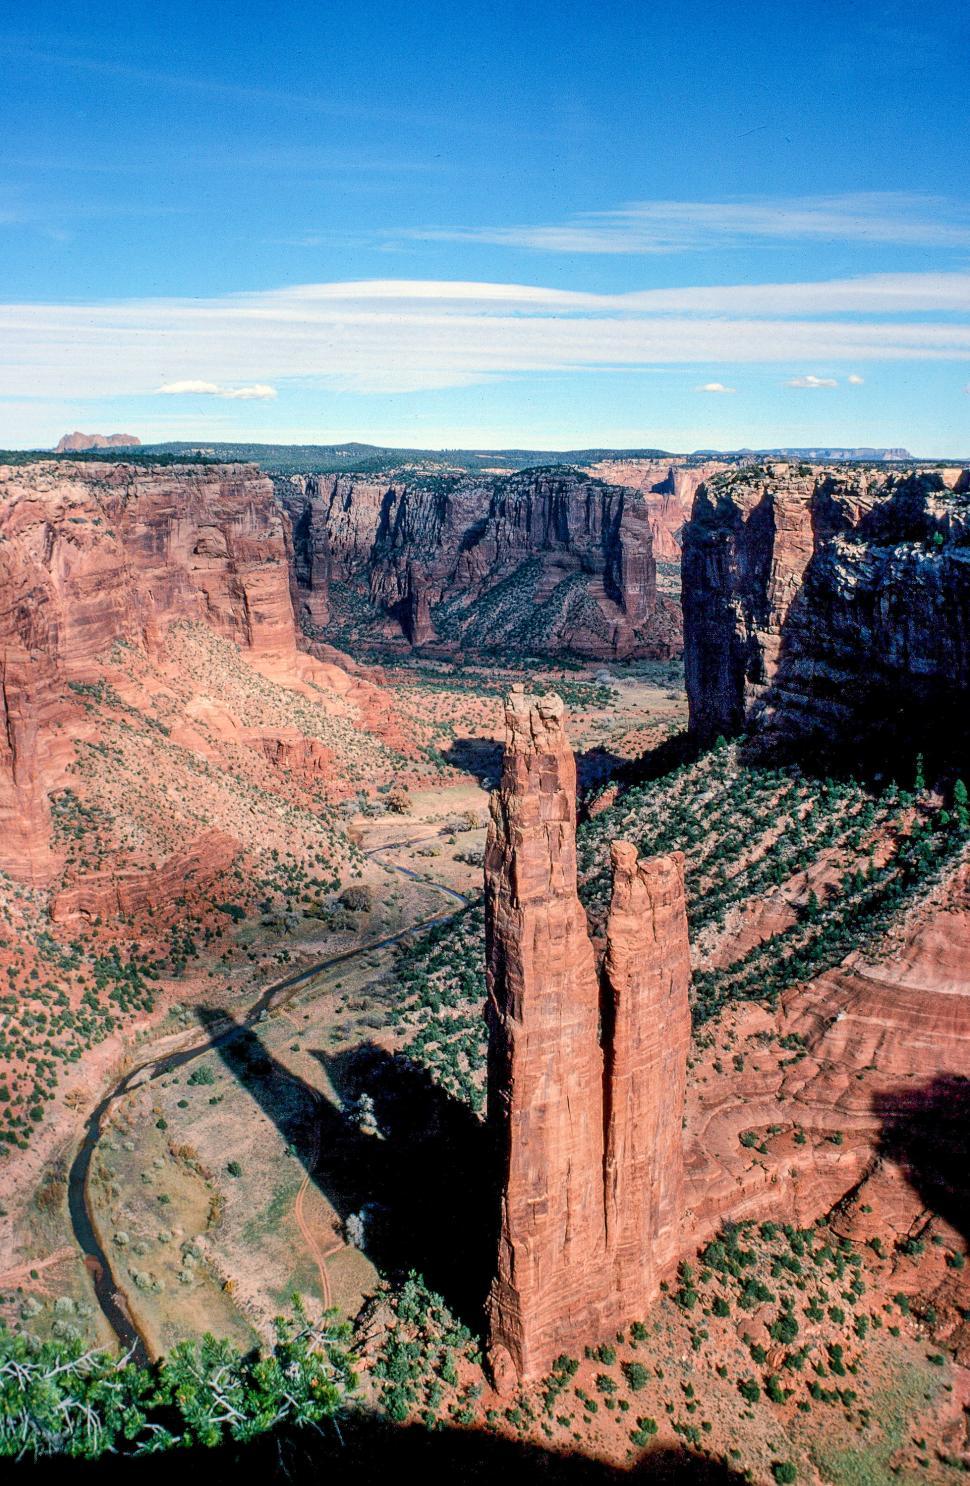 Free Image of Spider Rock at Canyon de Chelly National Monument 